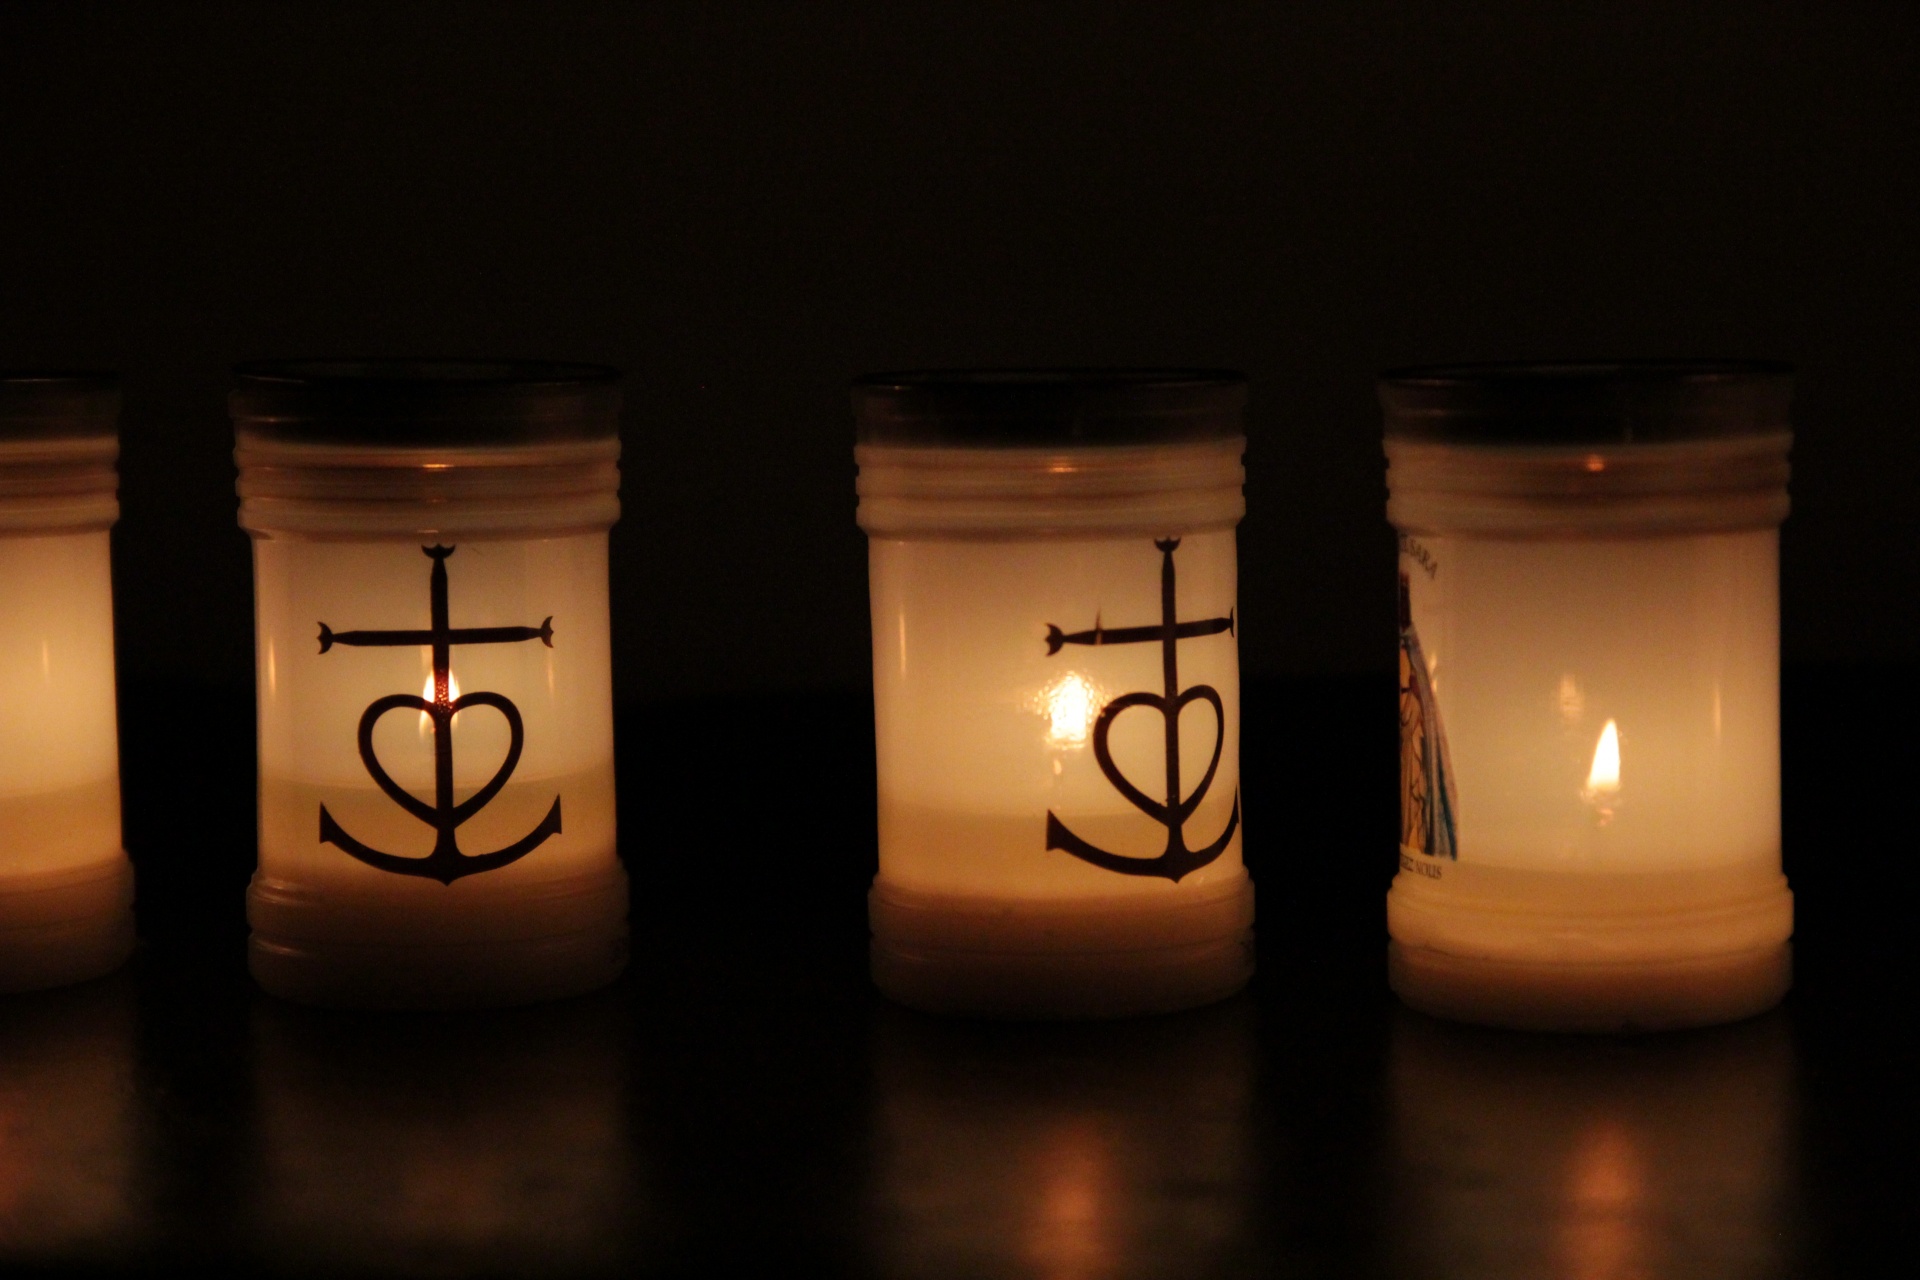 camargue lights candles free photo